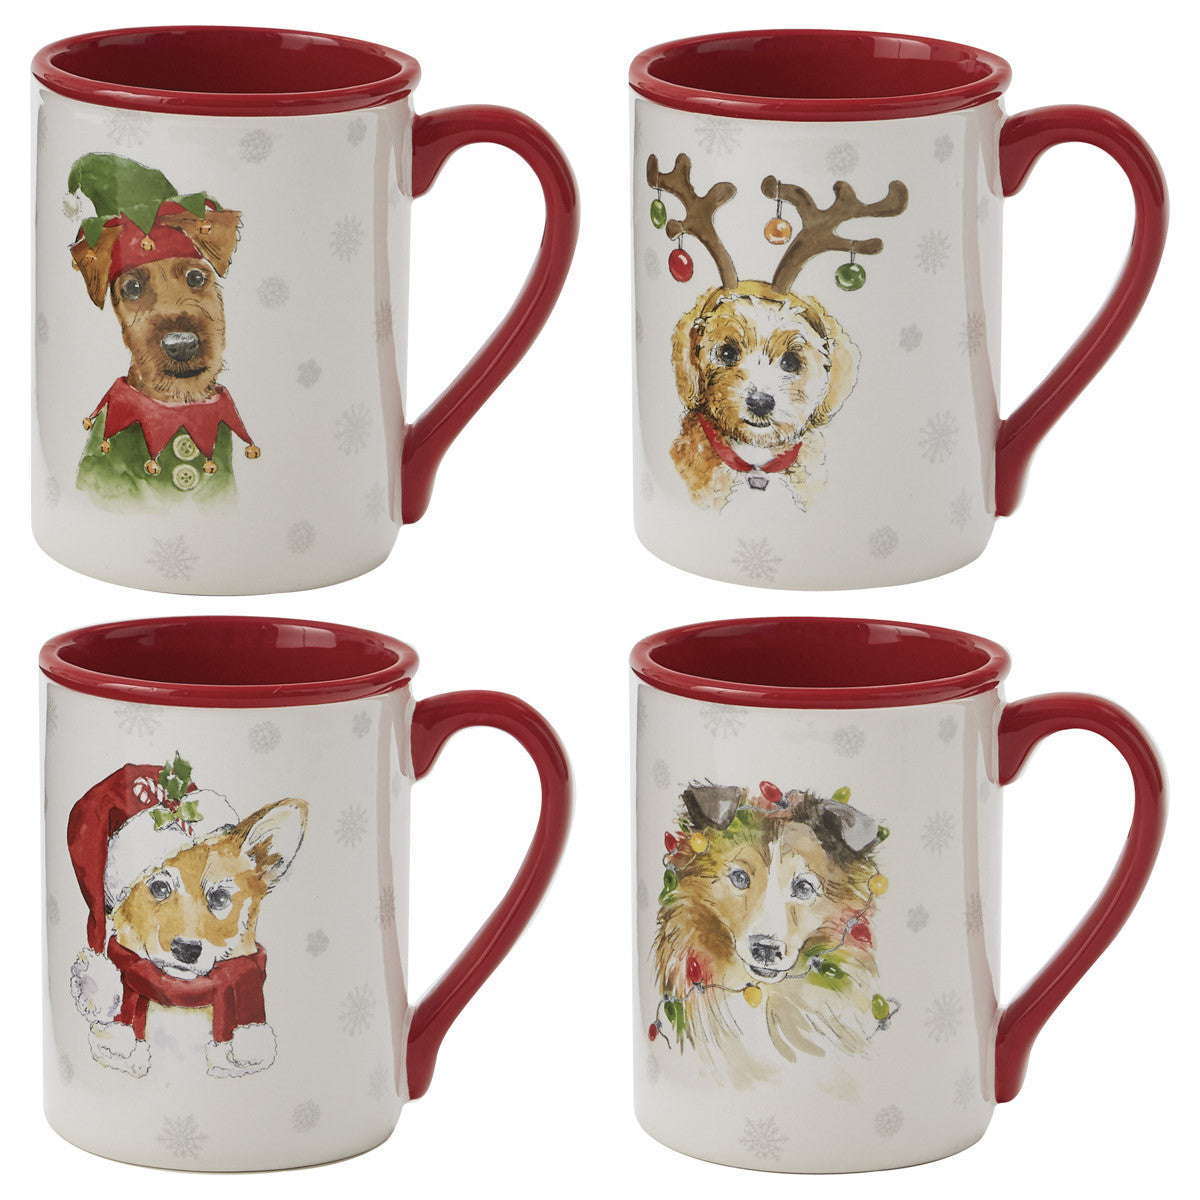 Holiday Paws Mugs - Set of 4 Assorted Park Designs